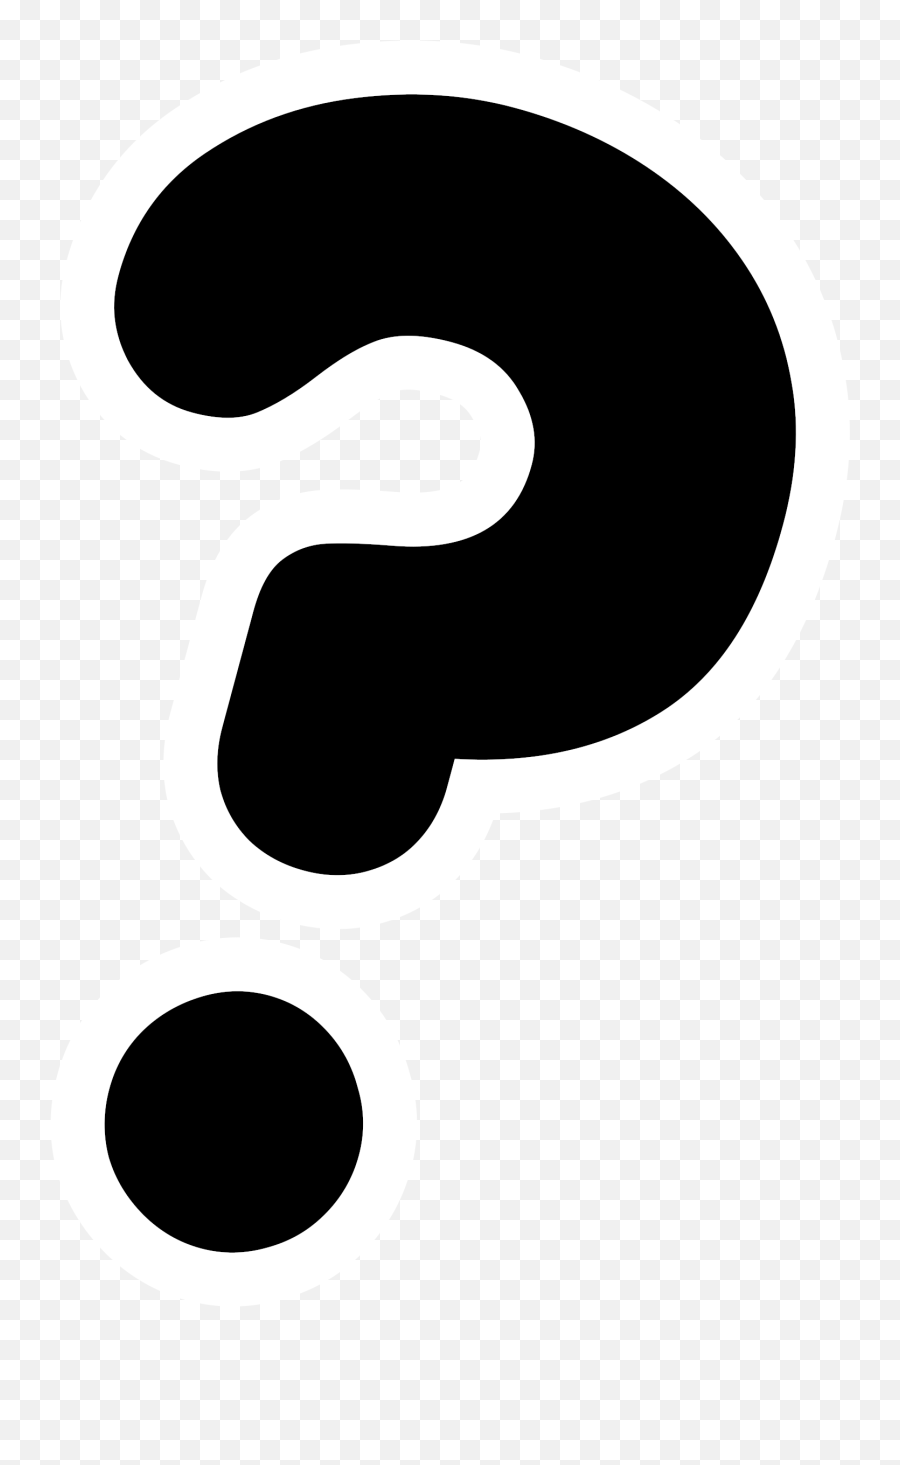 Clipart Image Of Question Mark - Question Mark Clipart Emoji,Double Exclamation Mark Emoji